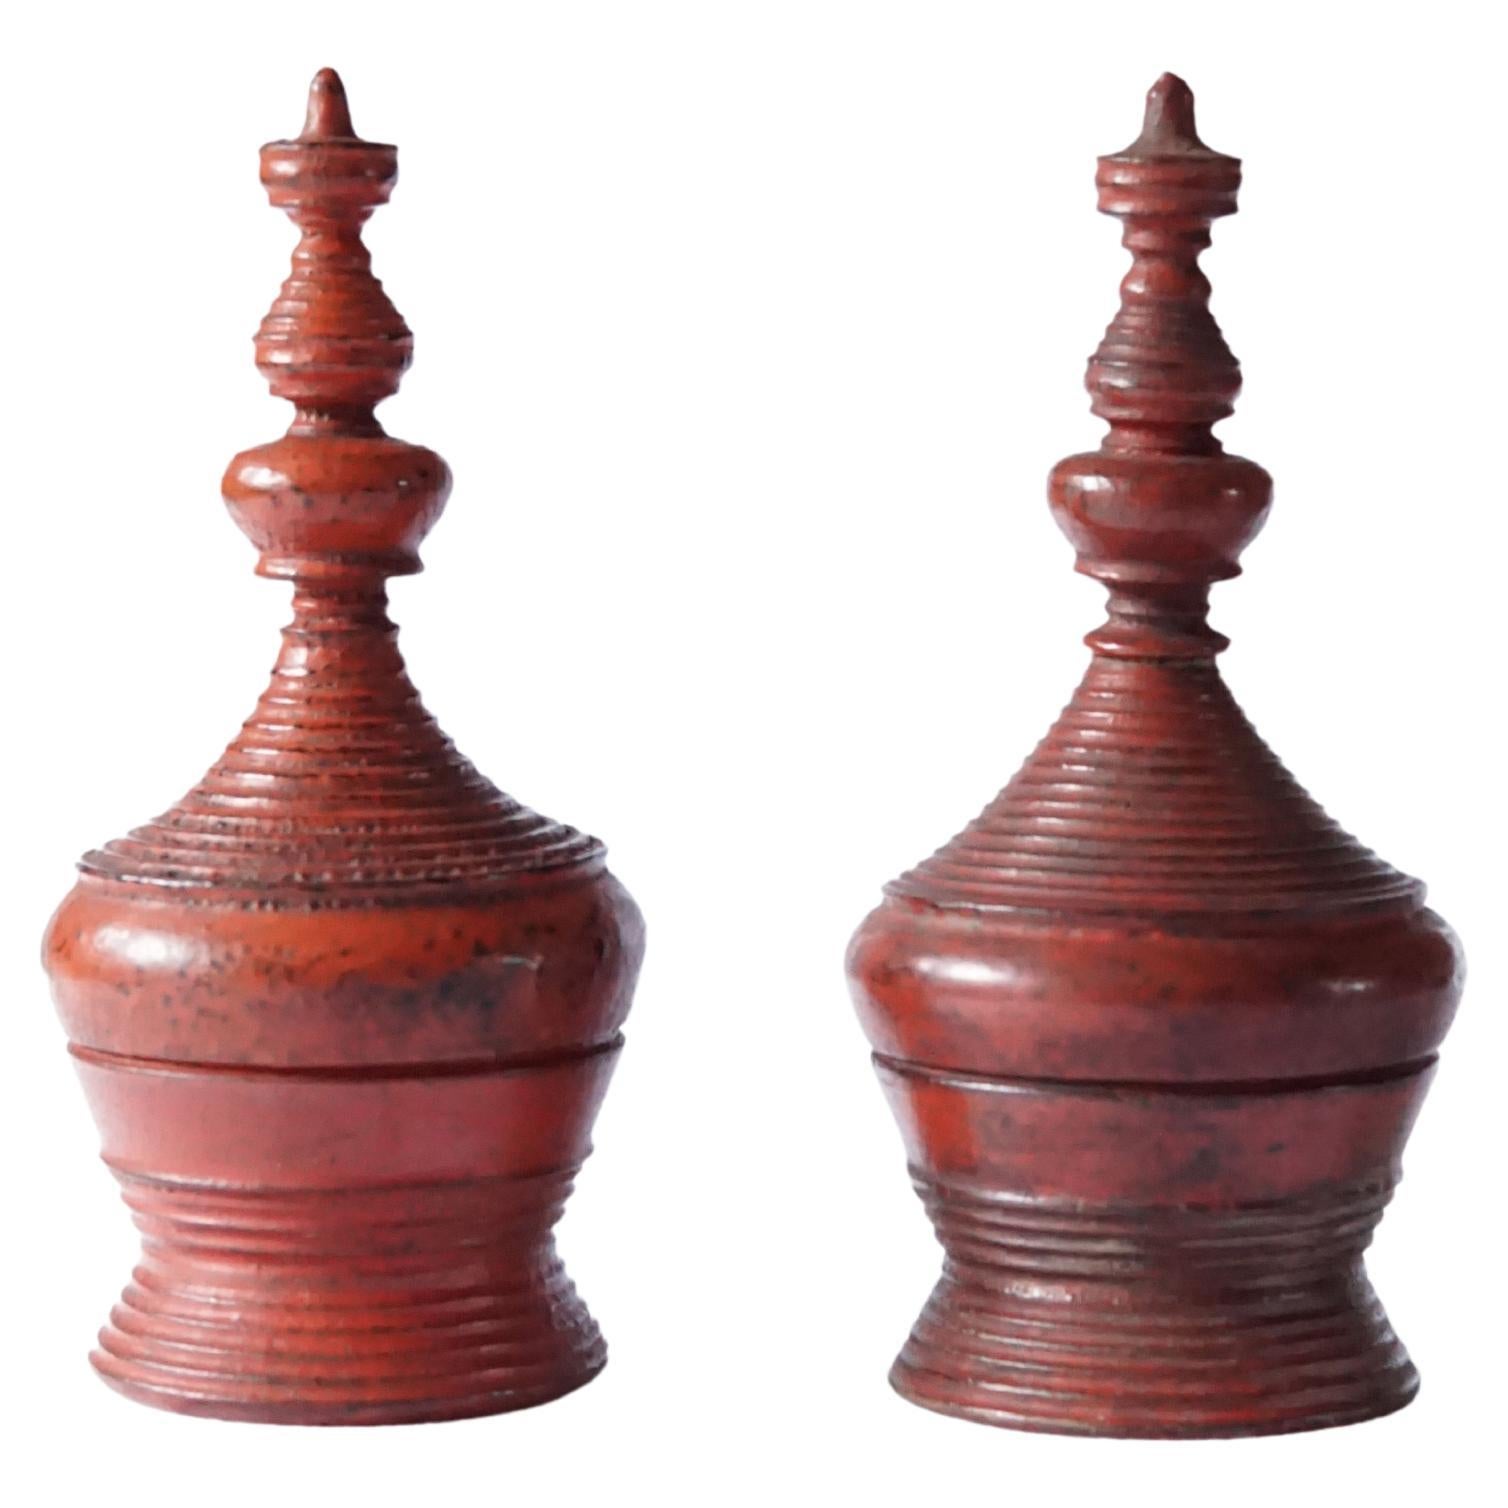 Pair of Small Burmese Lacquer Offering Vessels, "Hsun Ok", c. 1900 For Sale